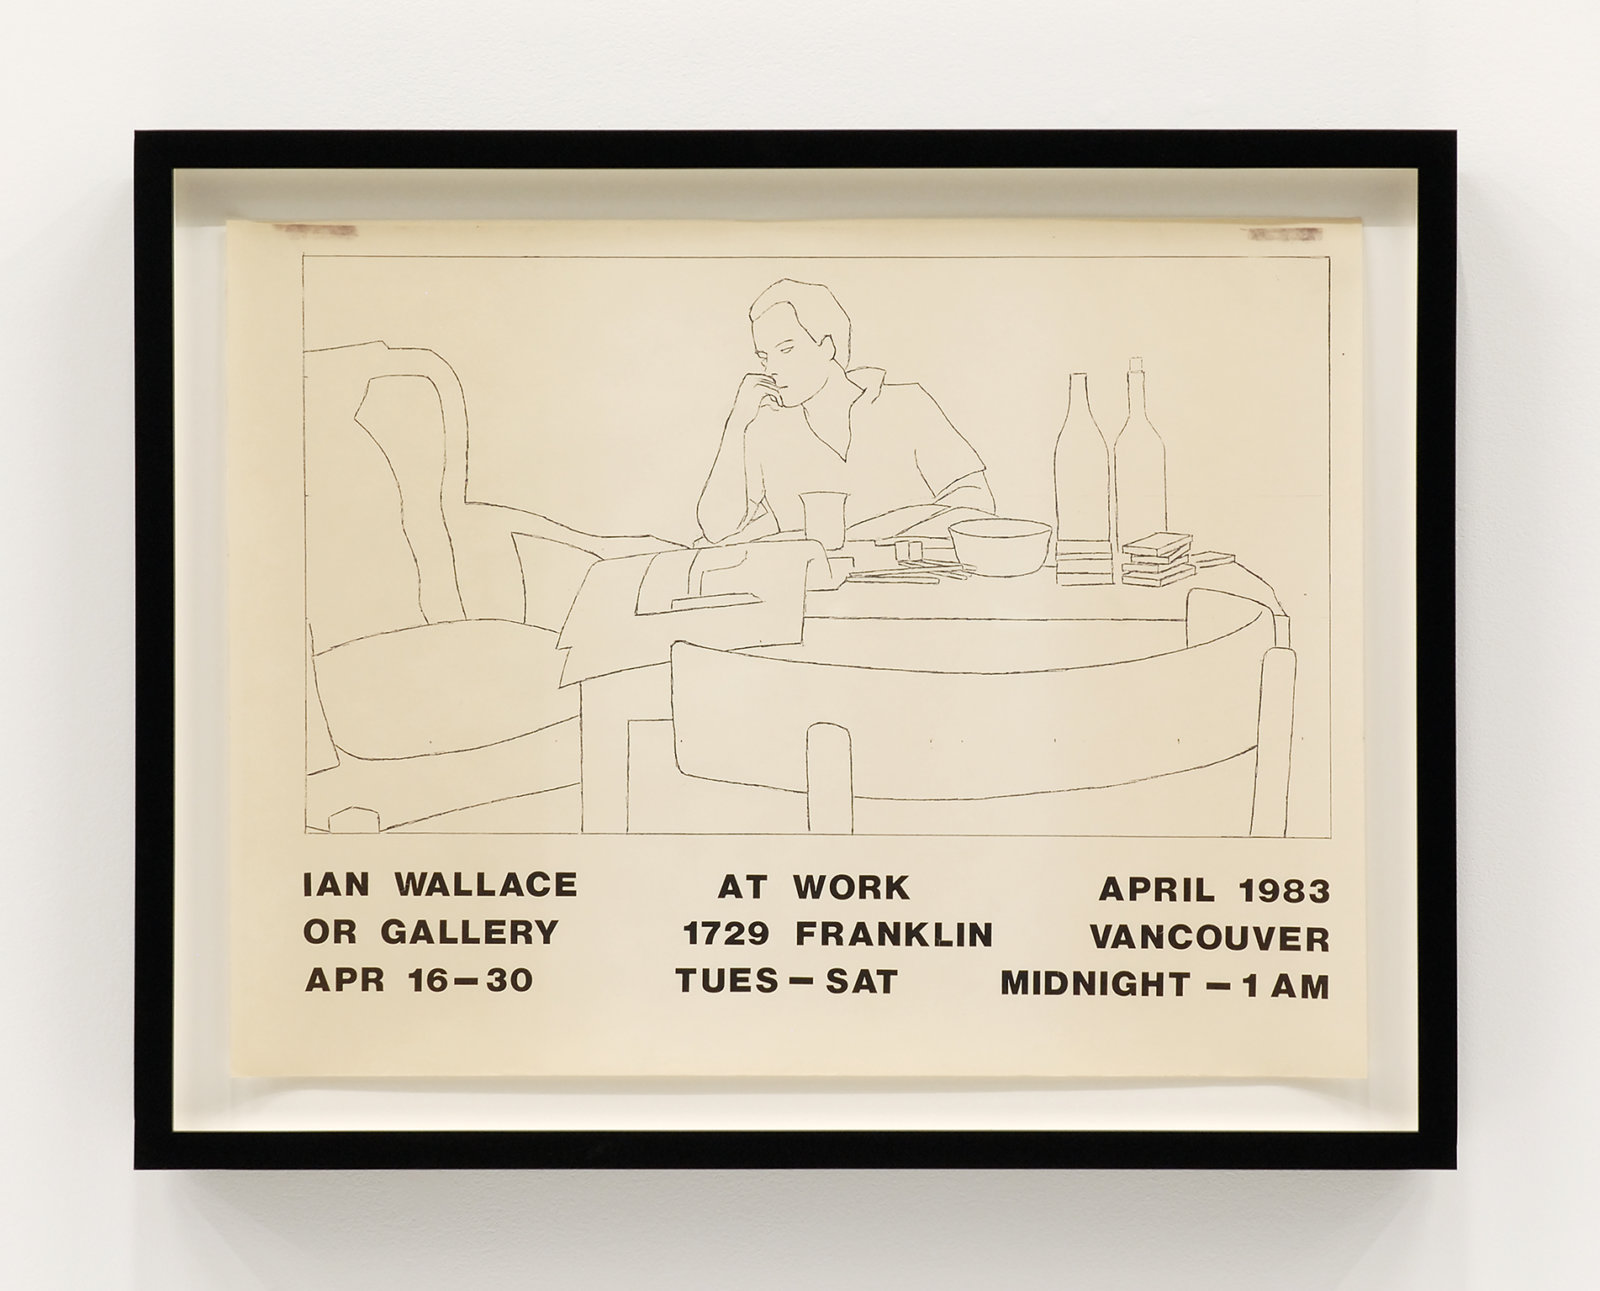 Ian Wallace, At Work 1983, 1983, exhibition poster, ink on paper, 18 x 24 in. (46 x 60 cm)